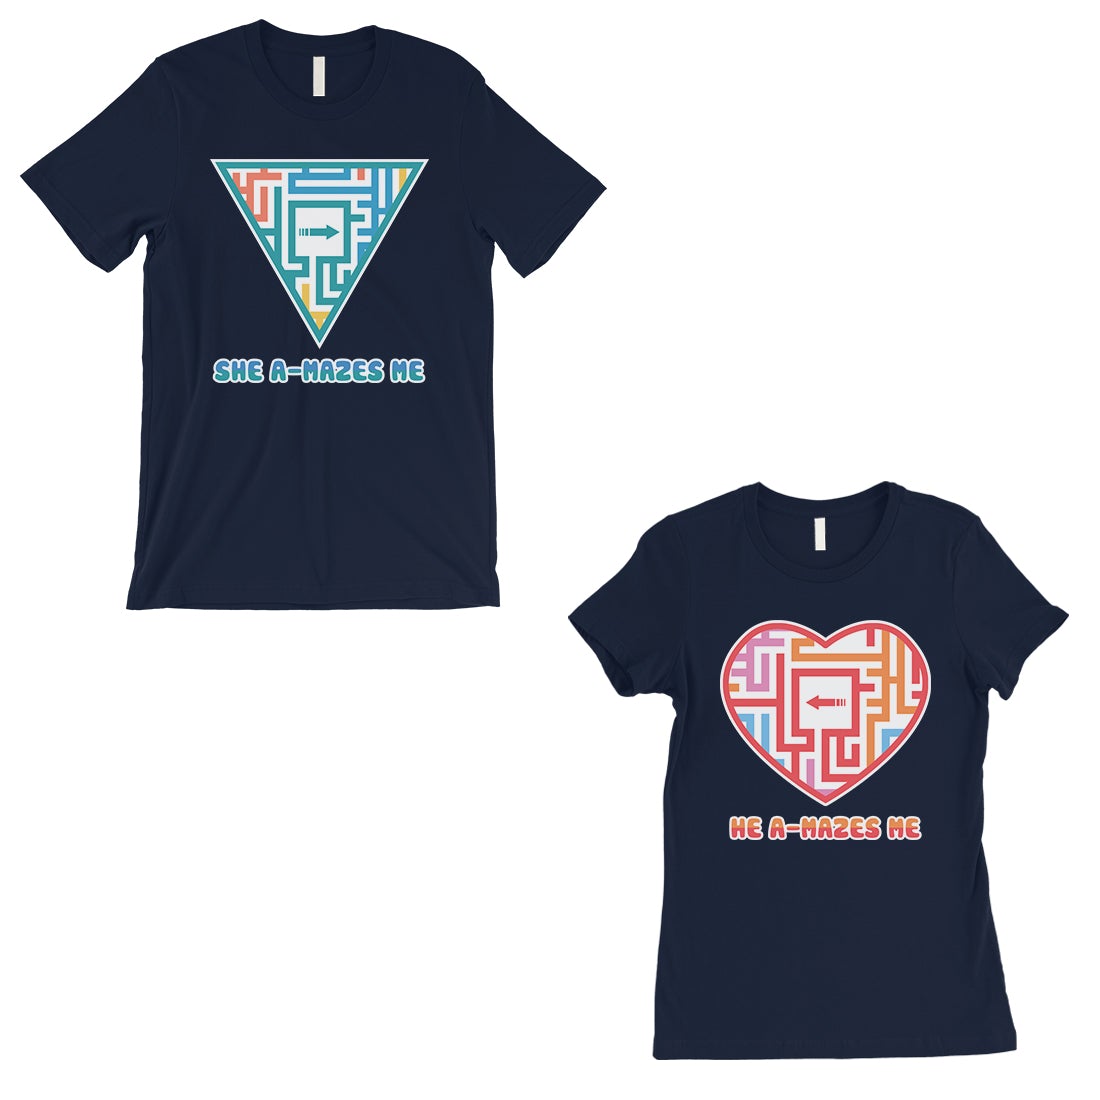 A-Mazes Me Navy Couples Matching T-Shirts